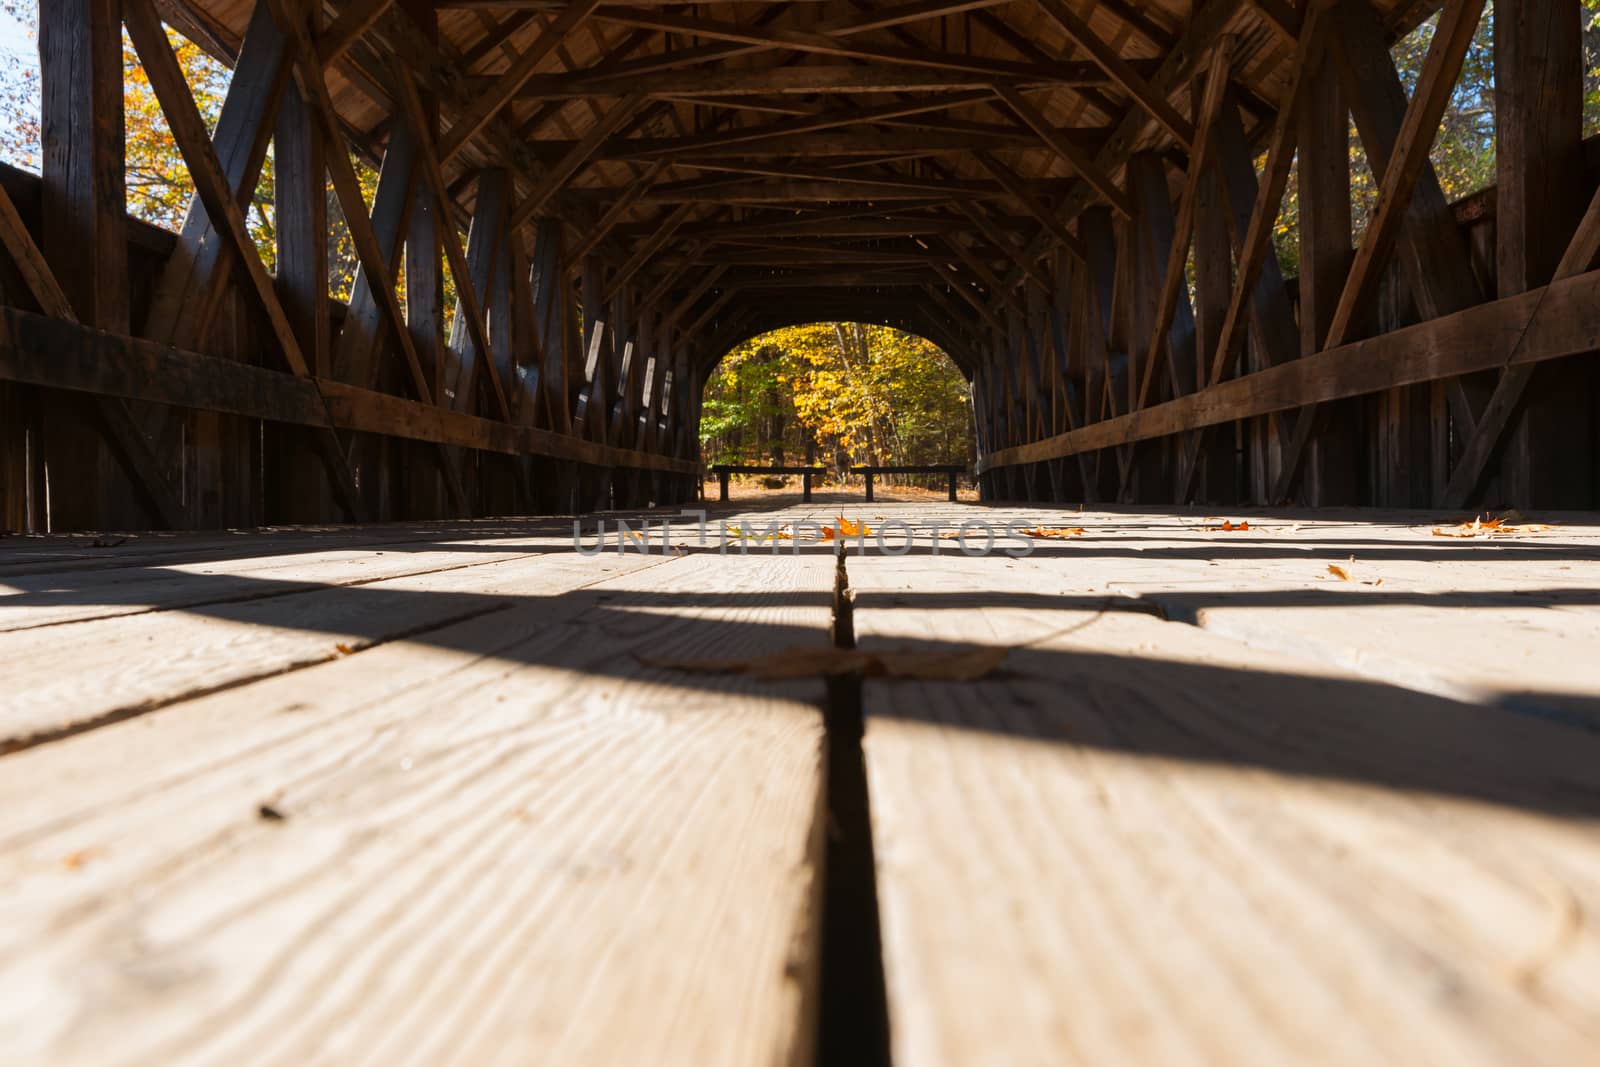 View along platform of Sunday River covered bridge with structure casting shadow pattern and leading lines. Sunday River, Maine, USA.